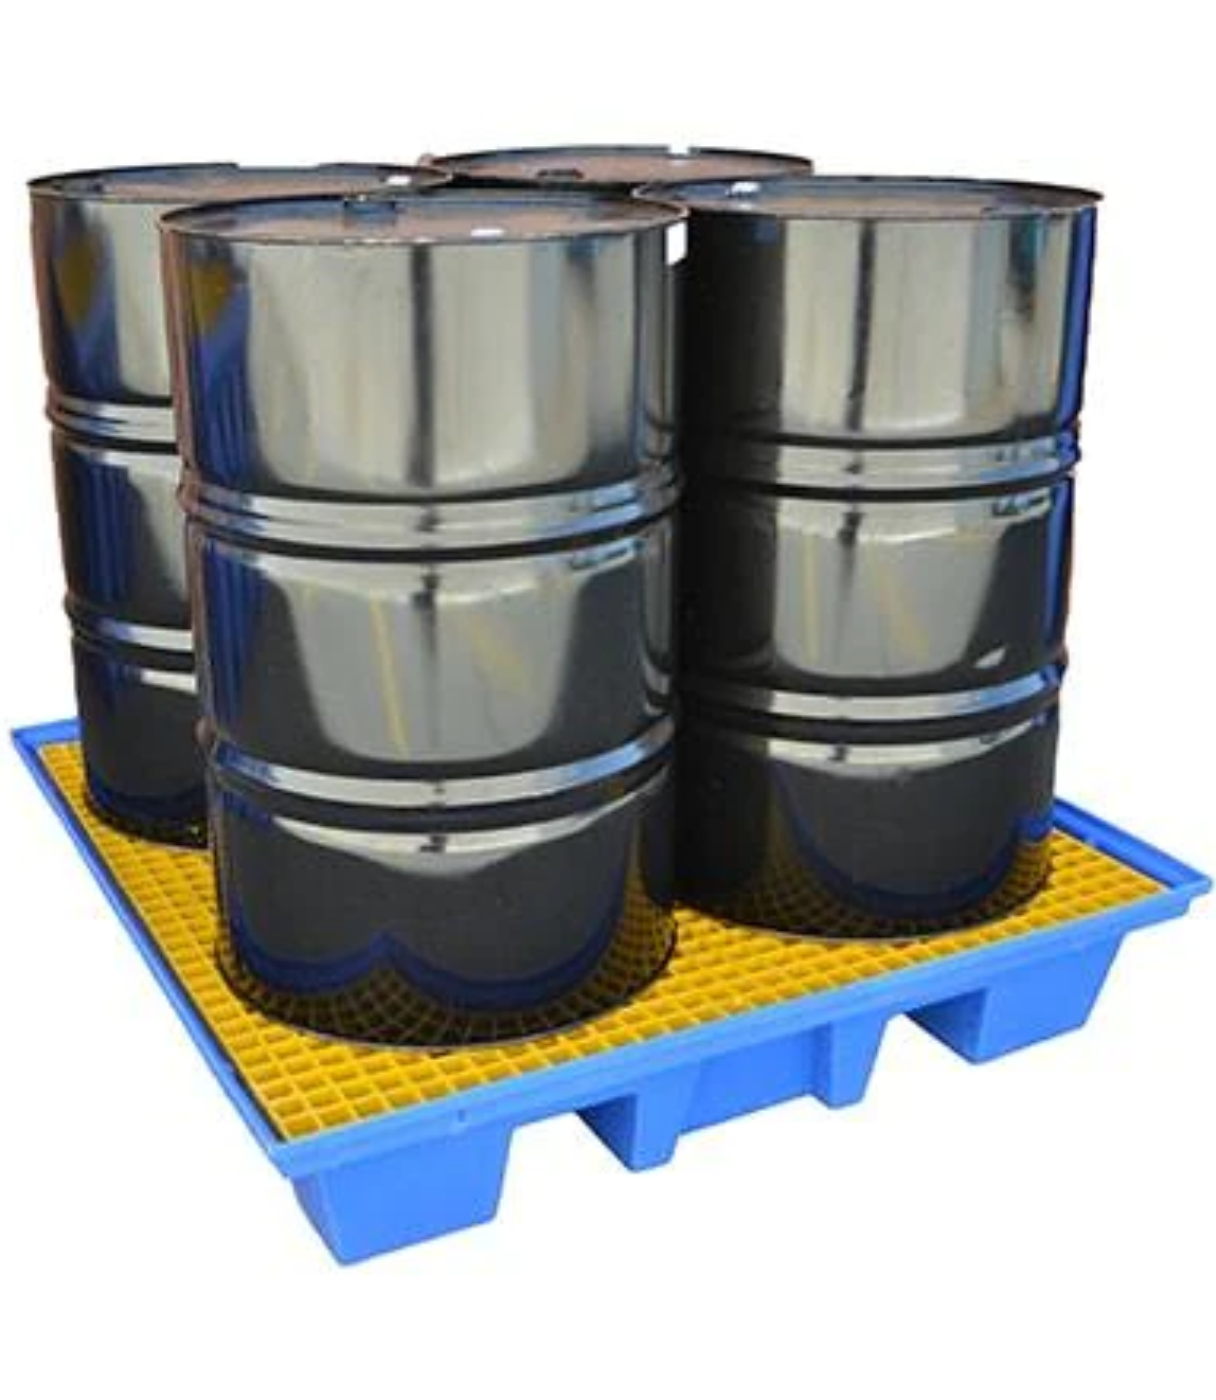 How Do You Use Chemical Bund Pallets?